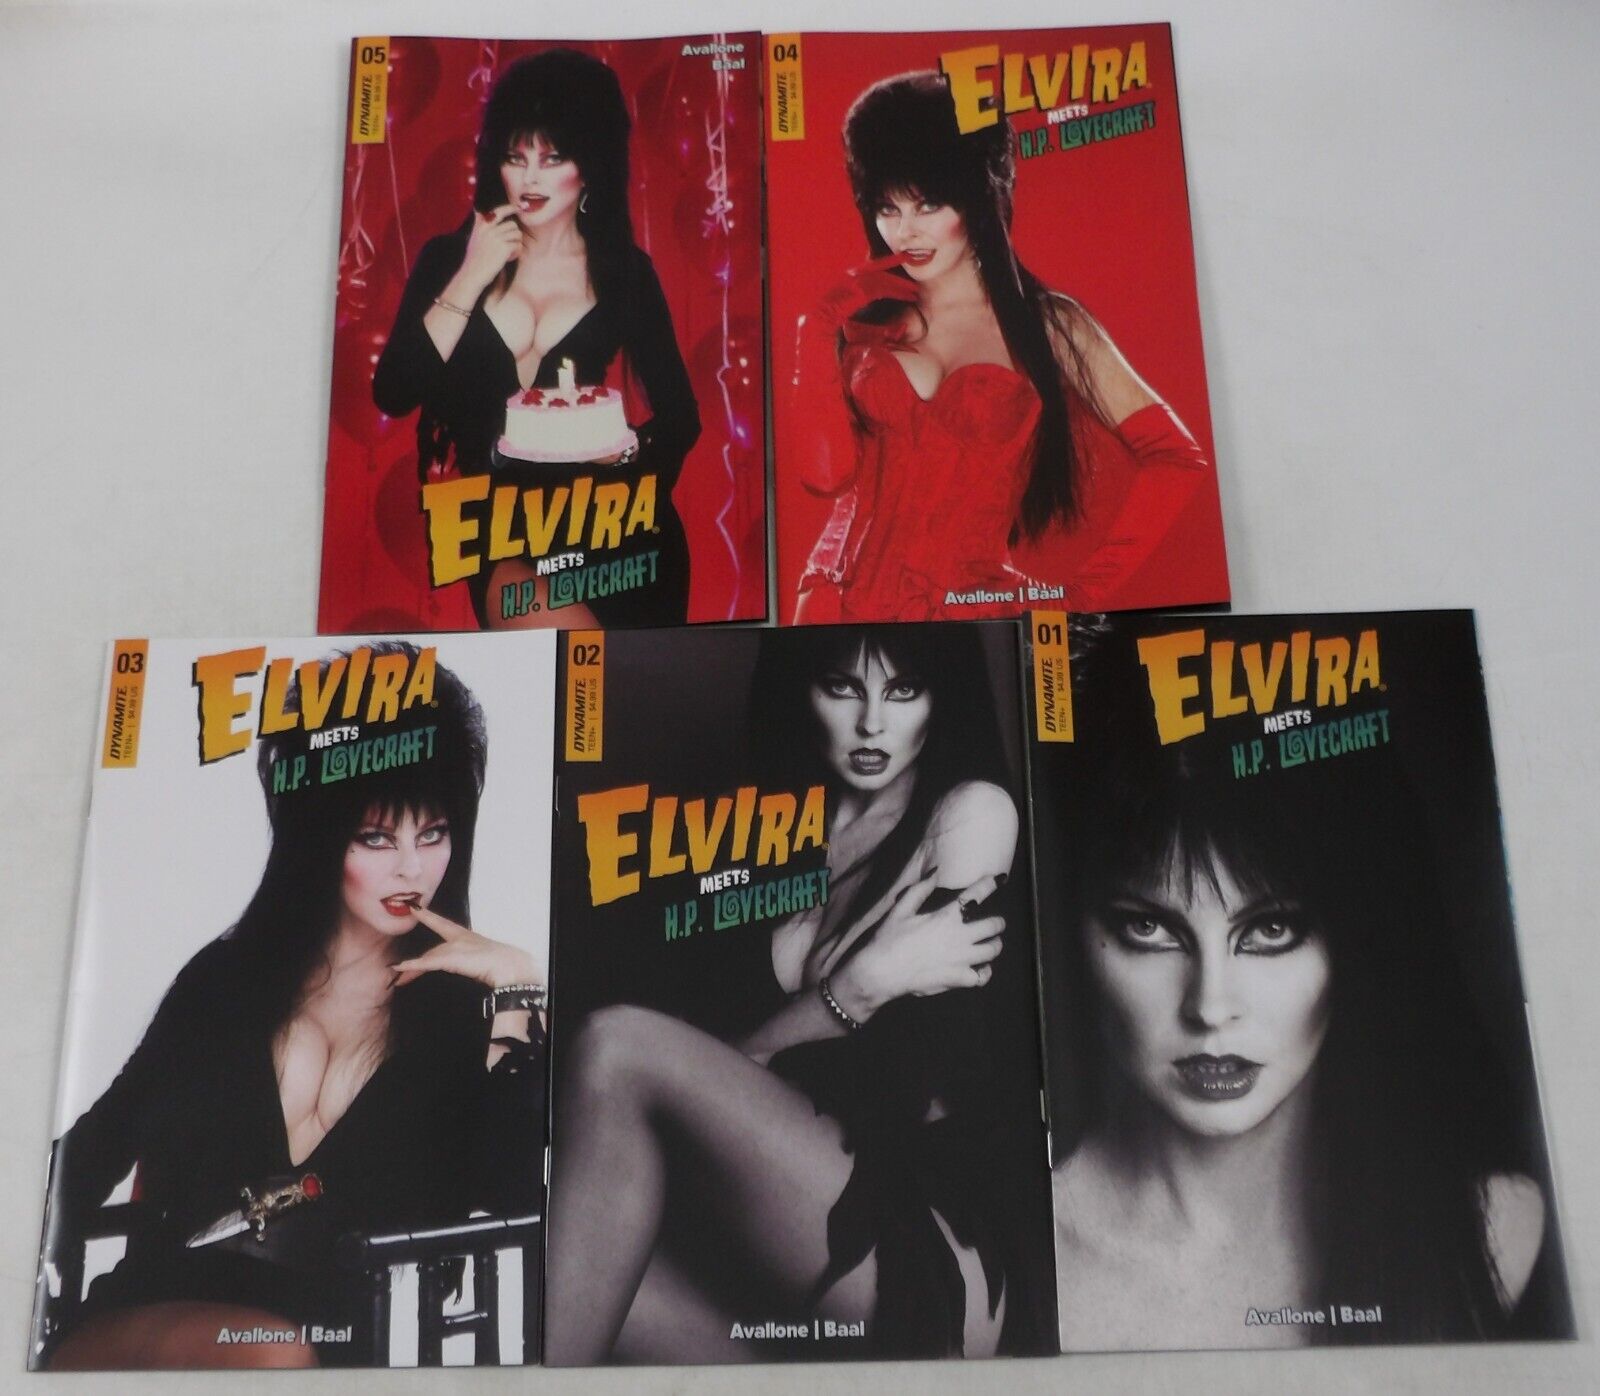 Elvira Meets H.P. Lovecraft #1-5 VF/NM complete series - all photo variants